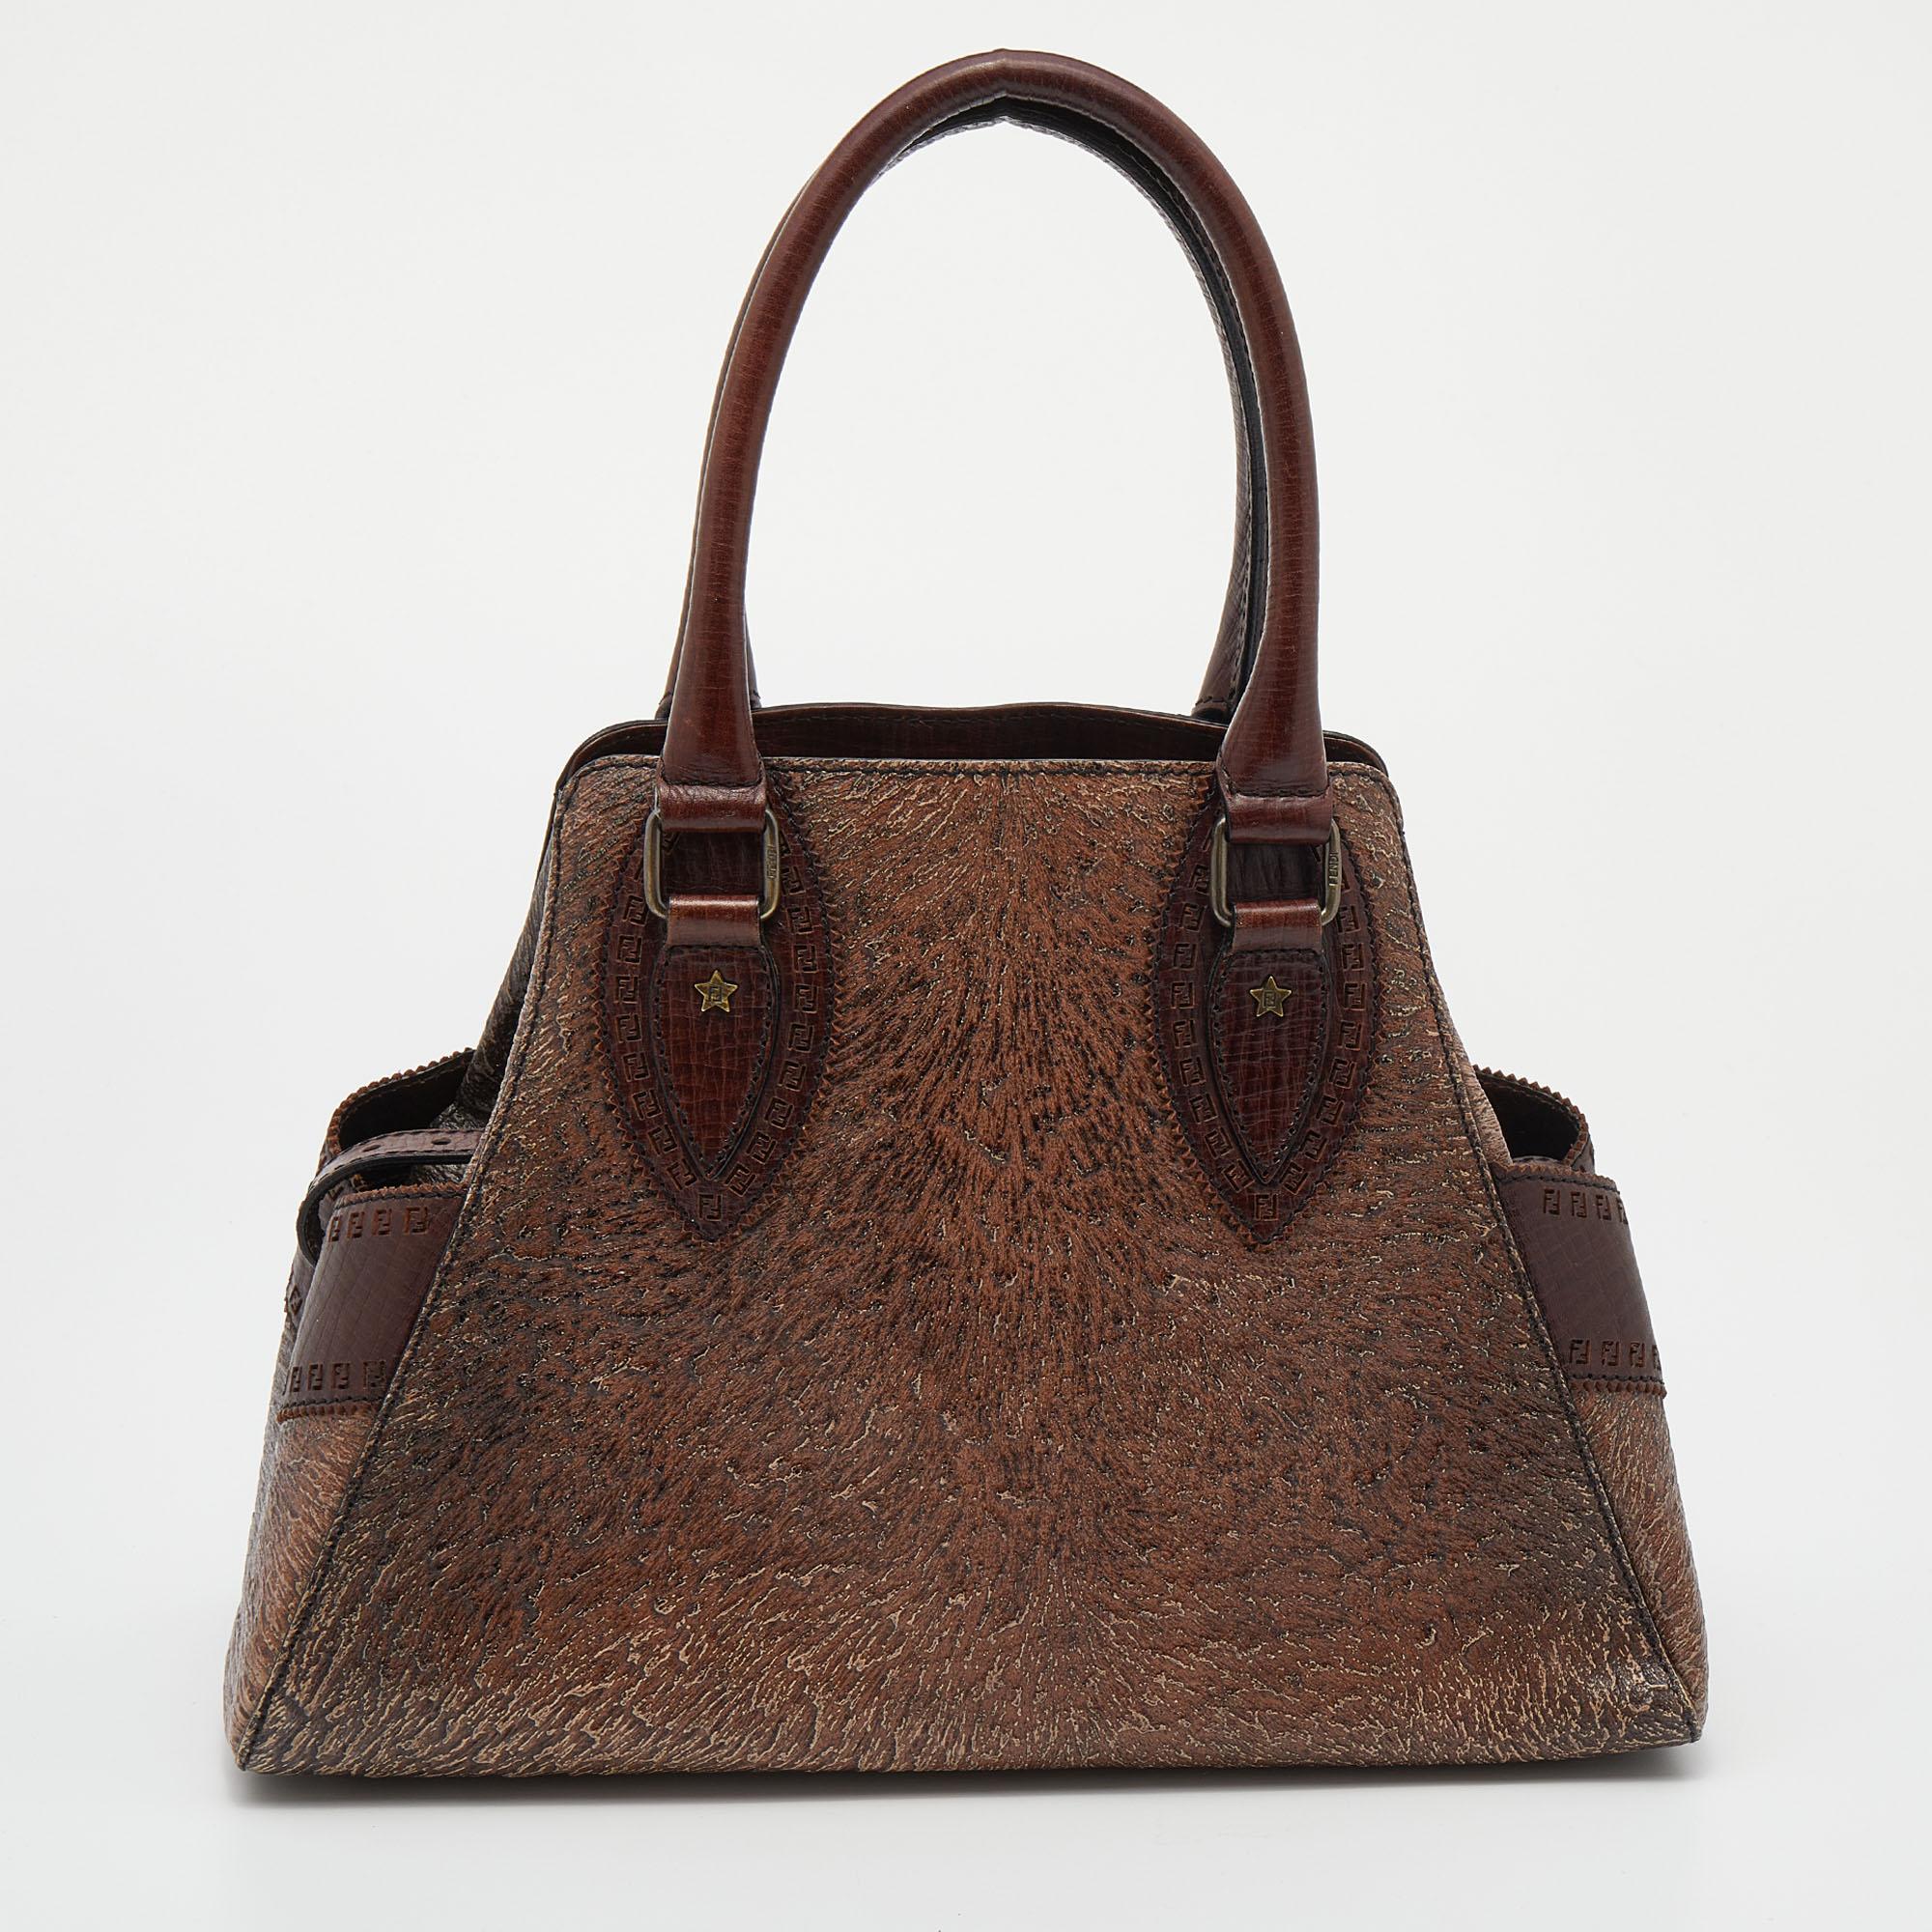 Fall in love almost instantly with this stunning bag by Fendi. Play with your style by carrying this brown bag that looks visually aesthetic. Shaped in textured embossed leather, this satchel is a trendy piece to add to your collection this